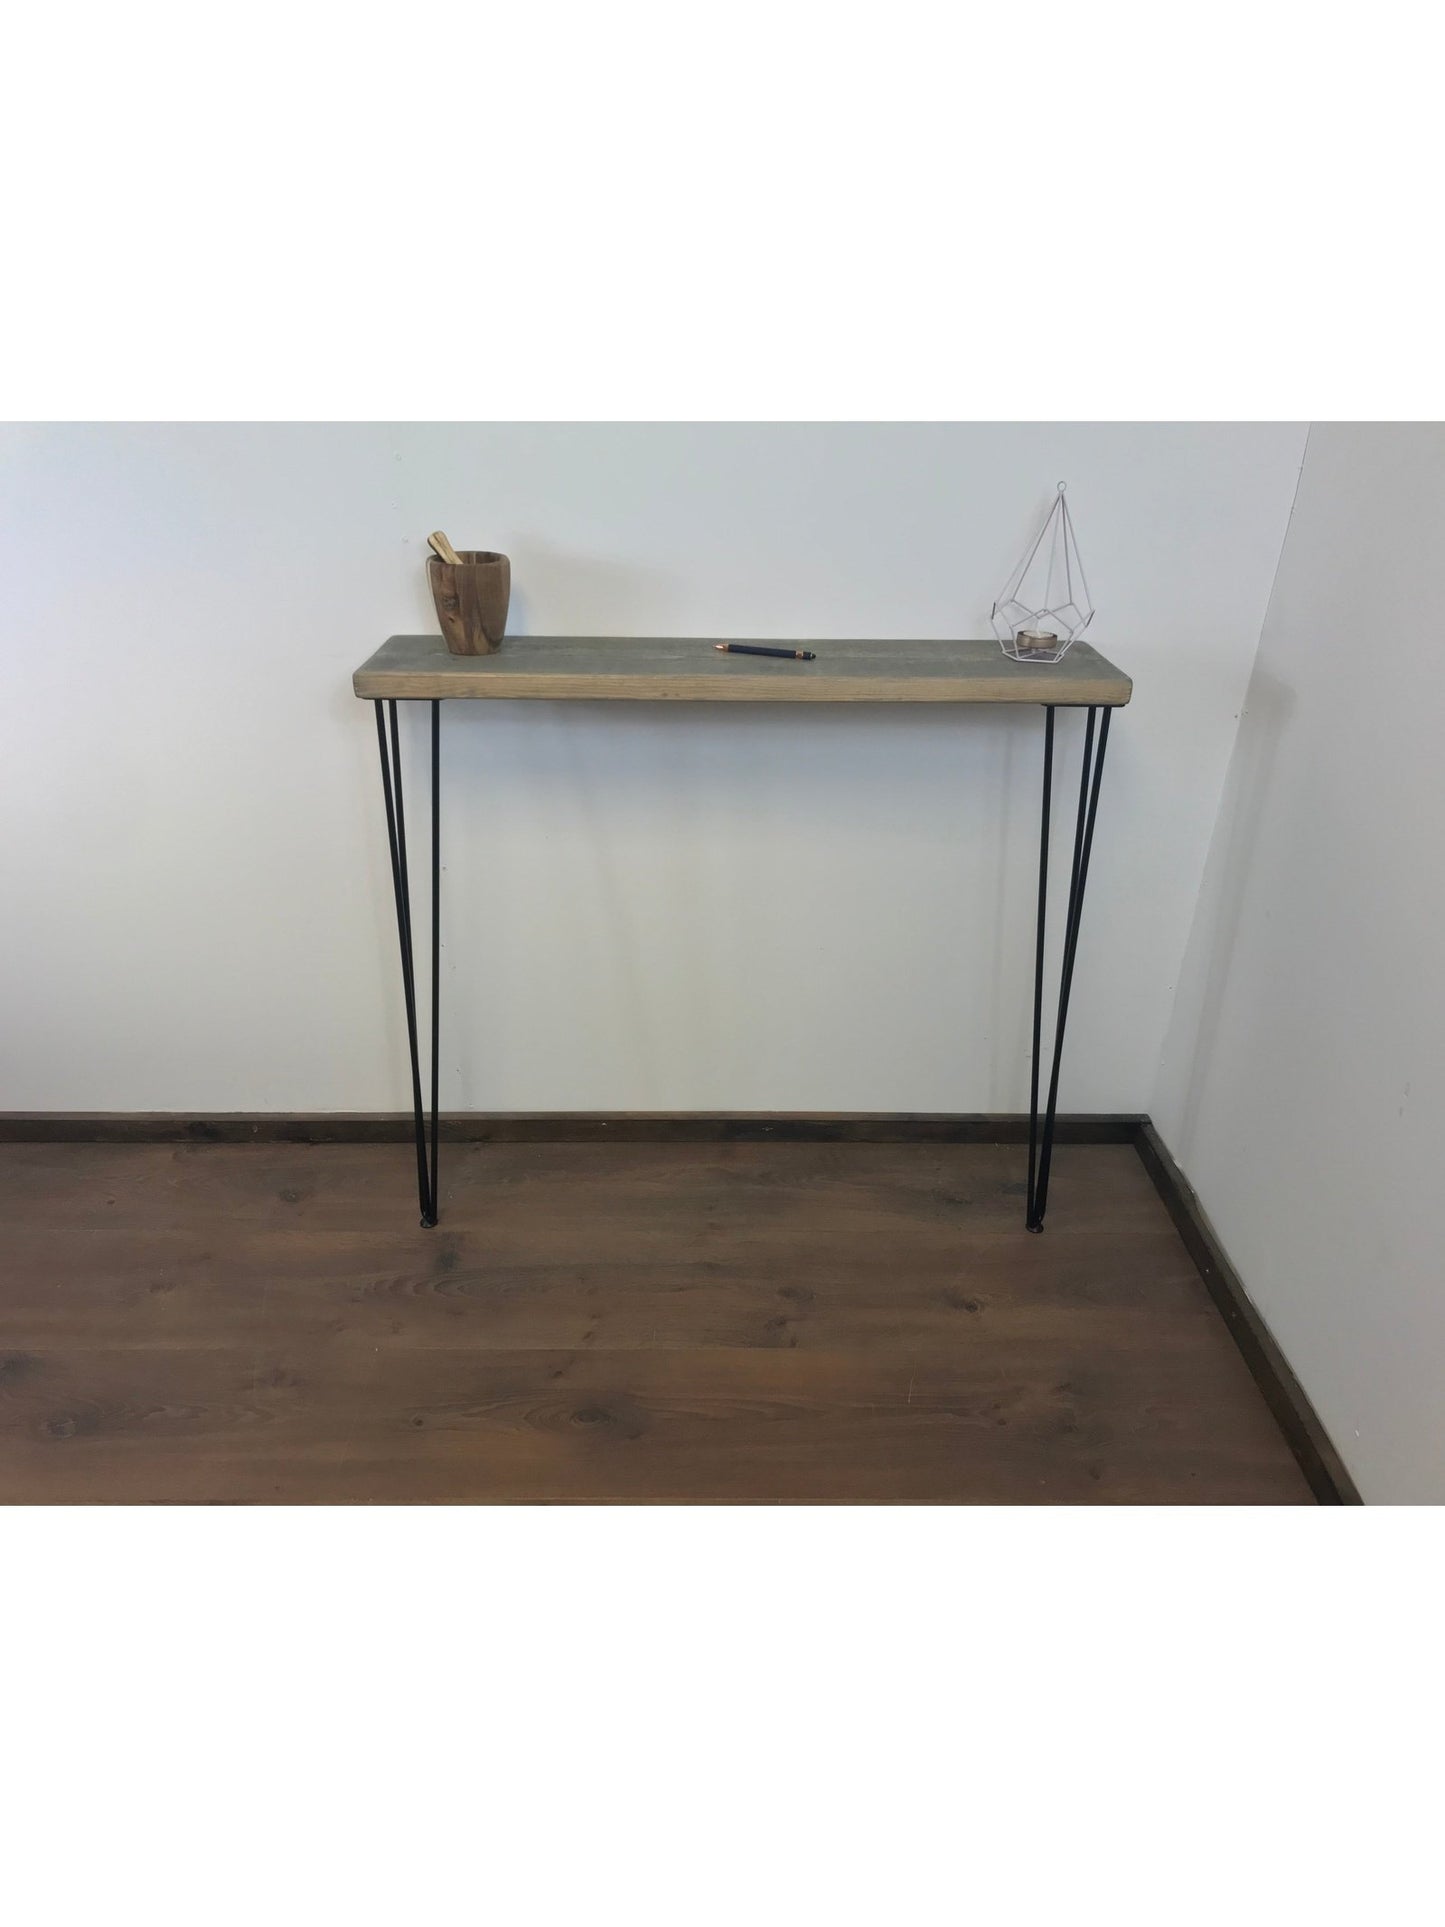 Rustic Console Table with Hairpin Legs, radiator shelf, Wooden Rustic Hallway table, Radiator Shelf / Cover, Handmade Wooden Hall Table